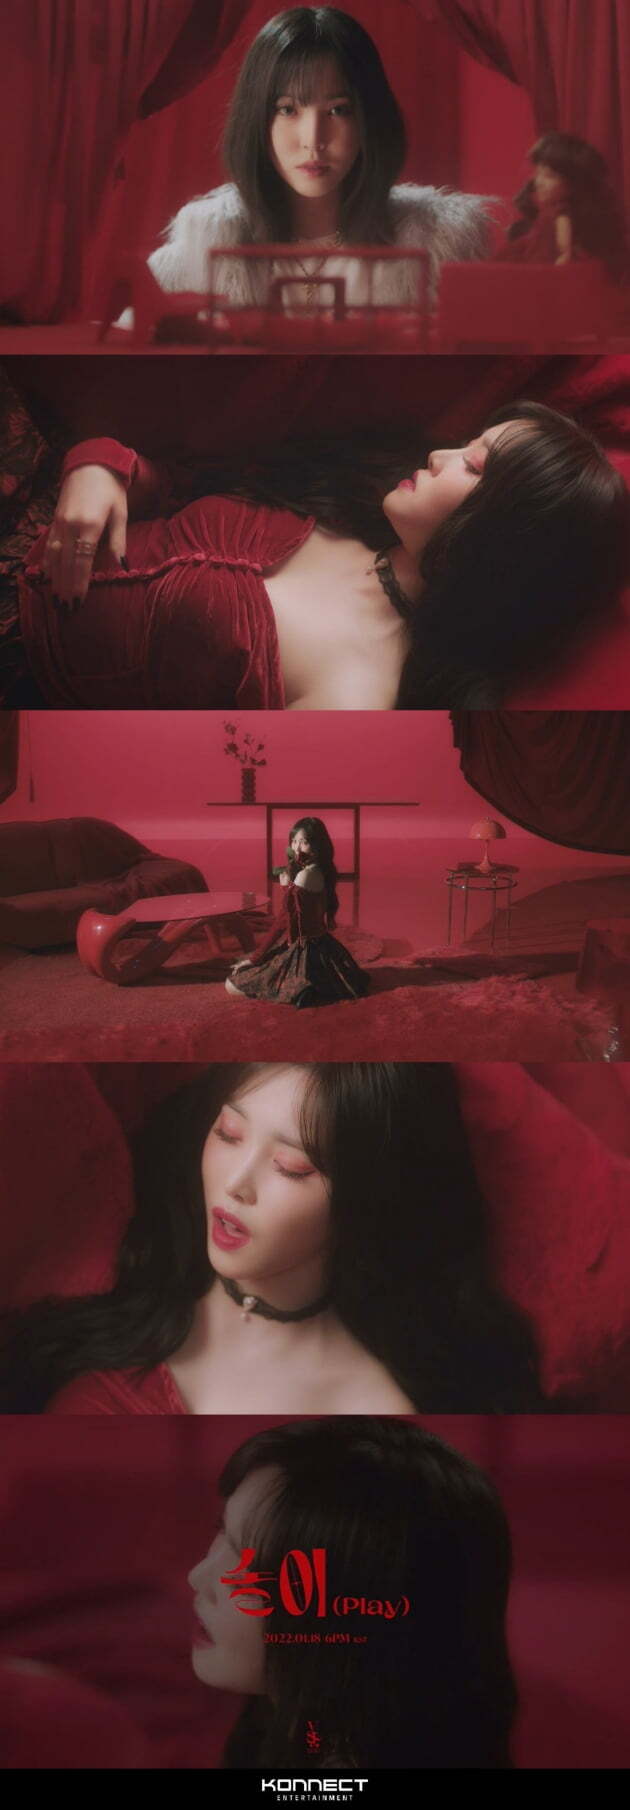 The solo debut of group GFriend Yuju (YUJU) is one day away.Connect Entertainment released a music video teaser for Play on its official SNS at 0:00 on the 17th.The intense red-dominated images amplify the mystery: the dolls that appear at the same time as they begin, the wandering that looks at them, and the wandering that closes their eyes cross.The scenes that flow like a profound symbol are raising expectations for the main part.The music is also intense, with the magnificent string sound showing the strong suction power of the late-earth notes, especially the high-pitched, temperate, high-pitched sounds that double the sad sensibility.The title song Play of Yujus first solo album REC. is a medium tempo emotional pop track.Yuju wrote and composed directly, and through the global song camp, many famous musicians from overseas participated in the program to enhance the perfection.